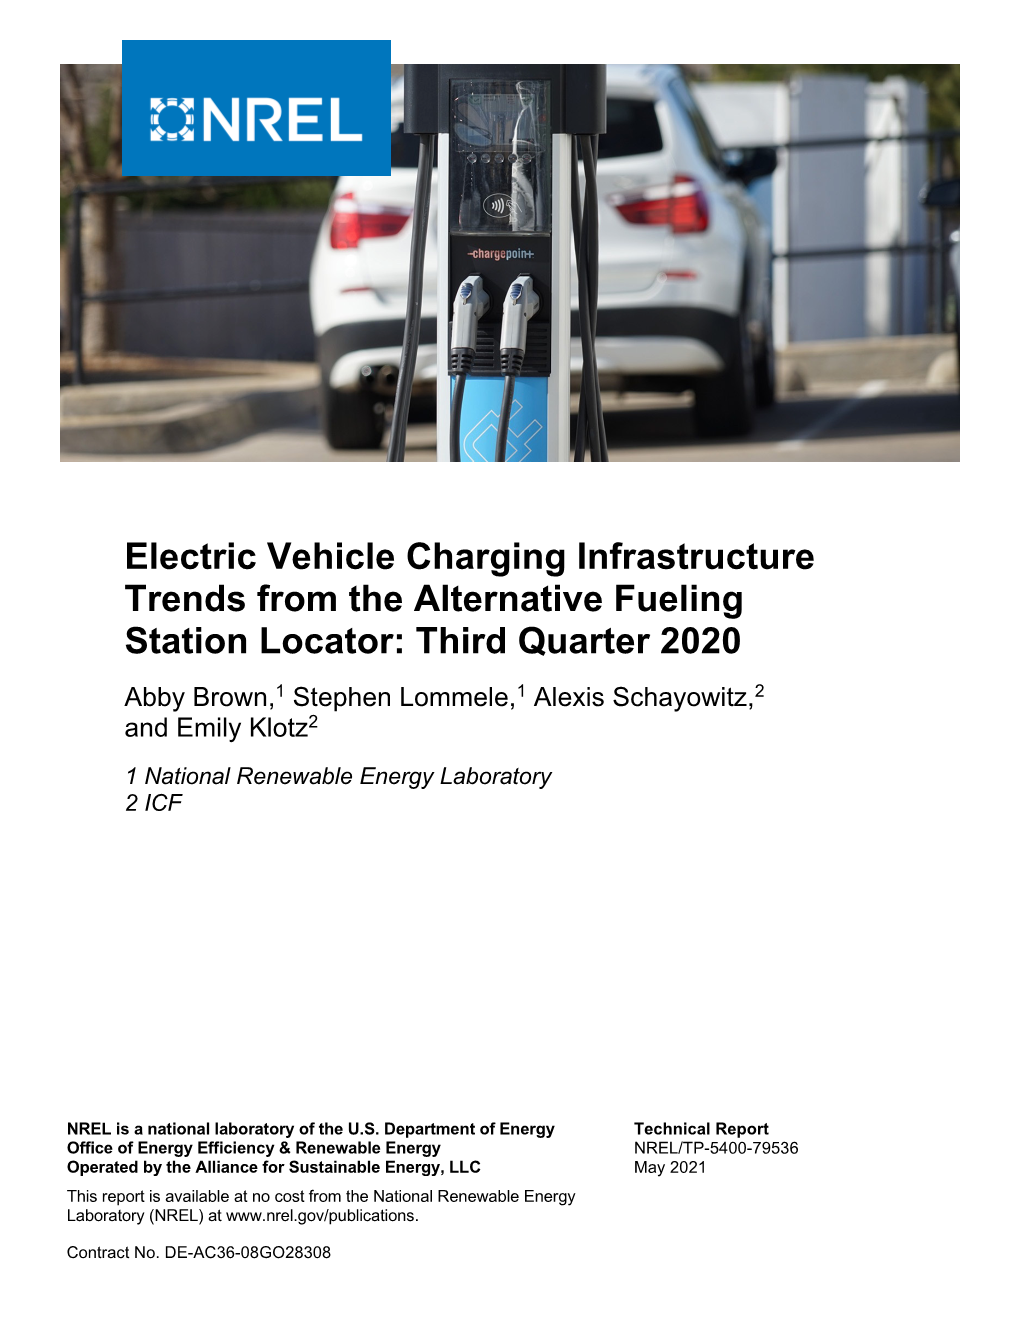 Electric Vehicle Charging Infrastructure Trends from The